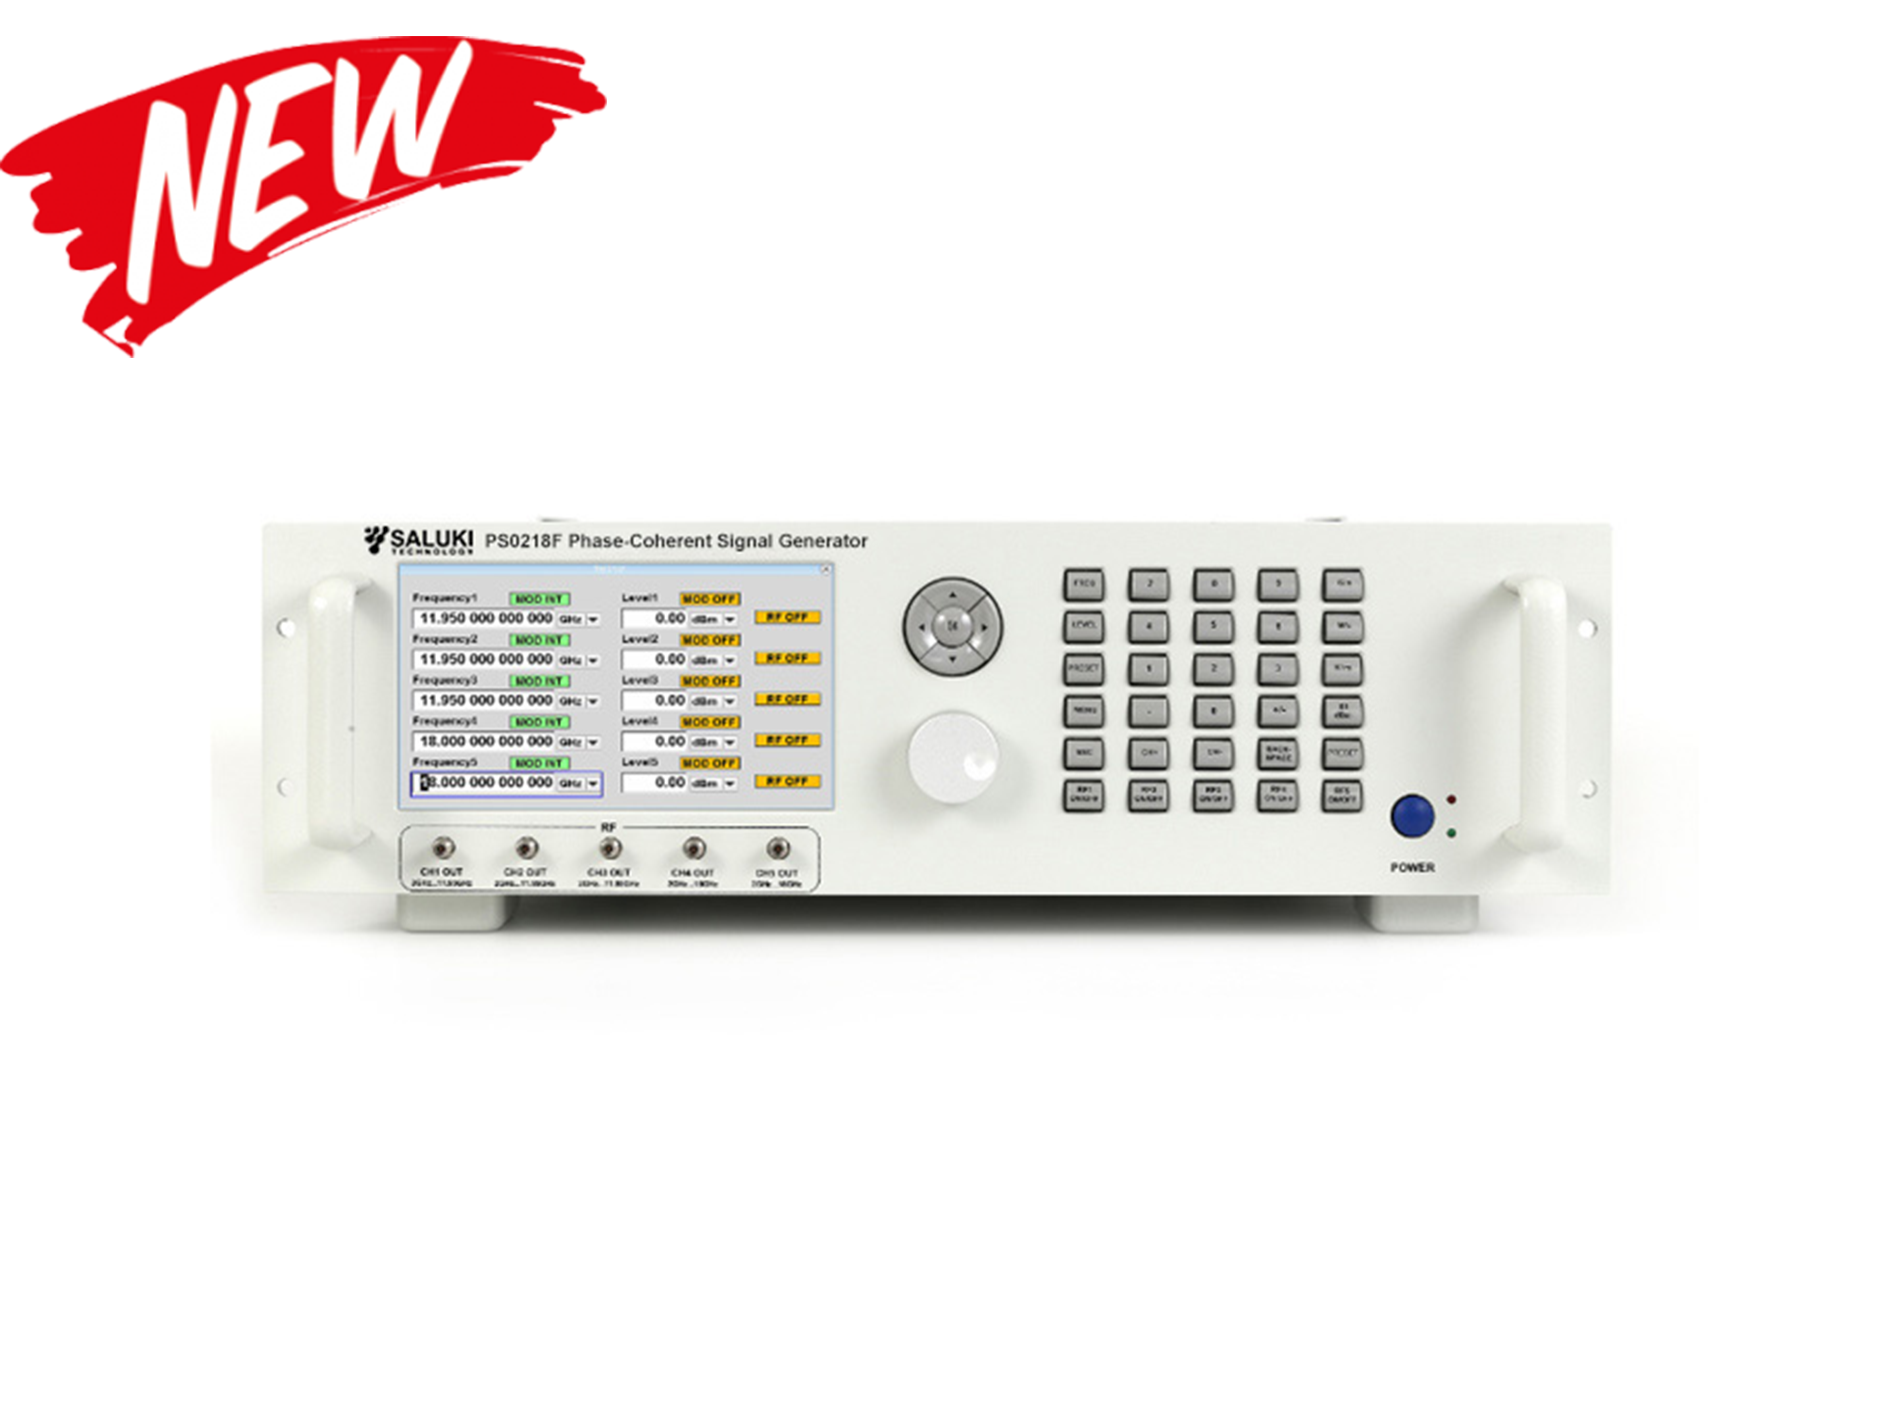 PS0218 Series Multi-Channel Phase-Coherent Signal Generator